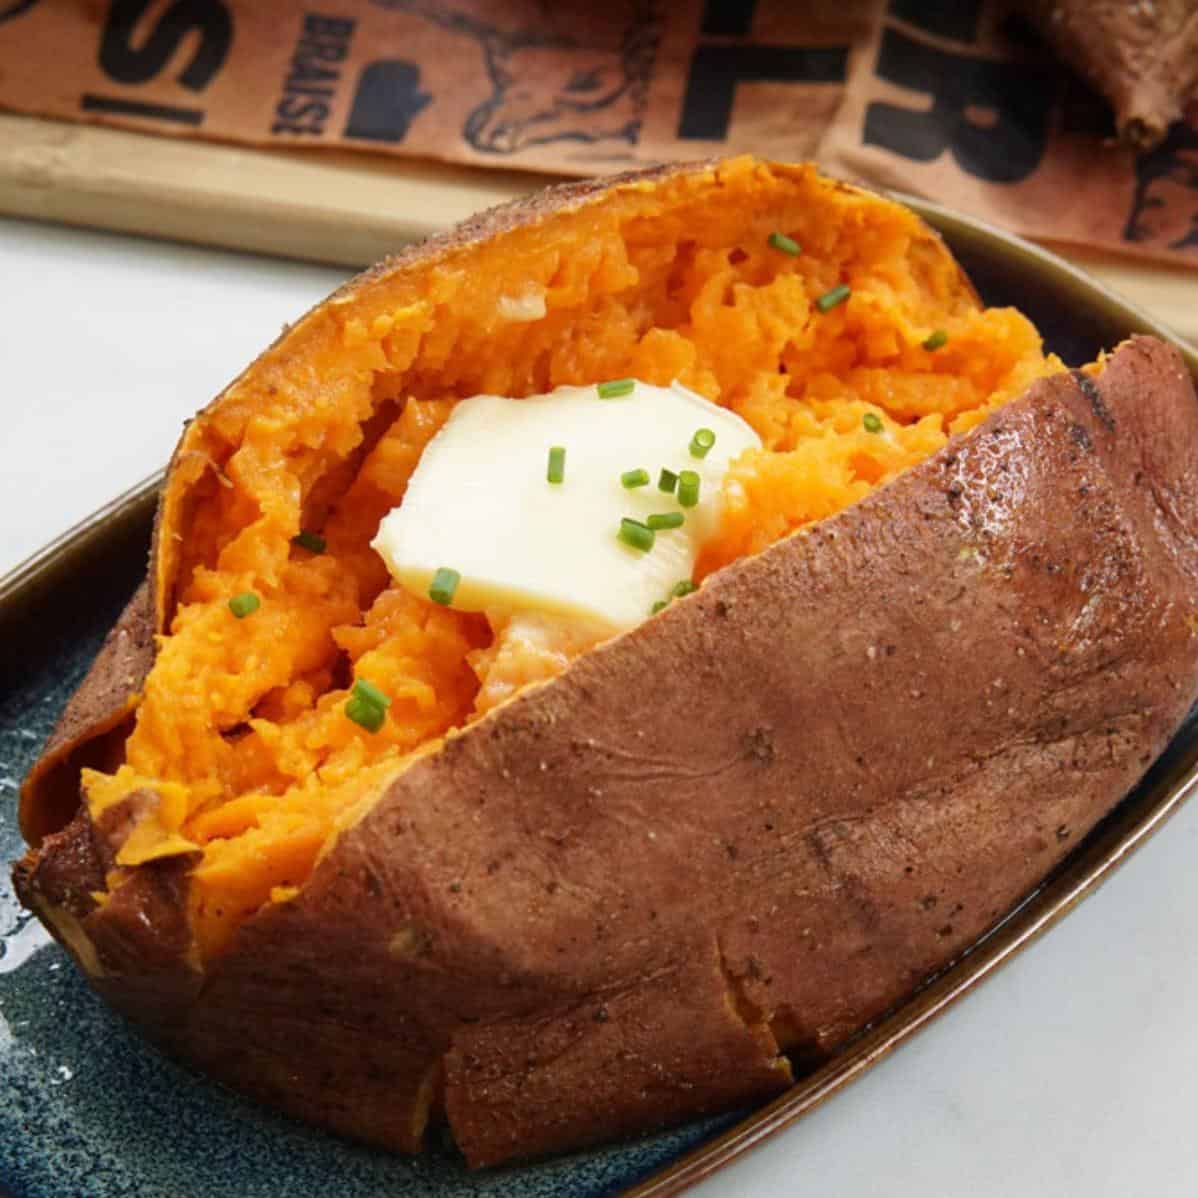  Get ready to take your taste buds on a smoky adventure with these delicious sweet potatoes